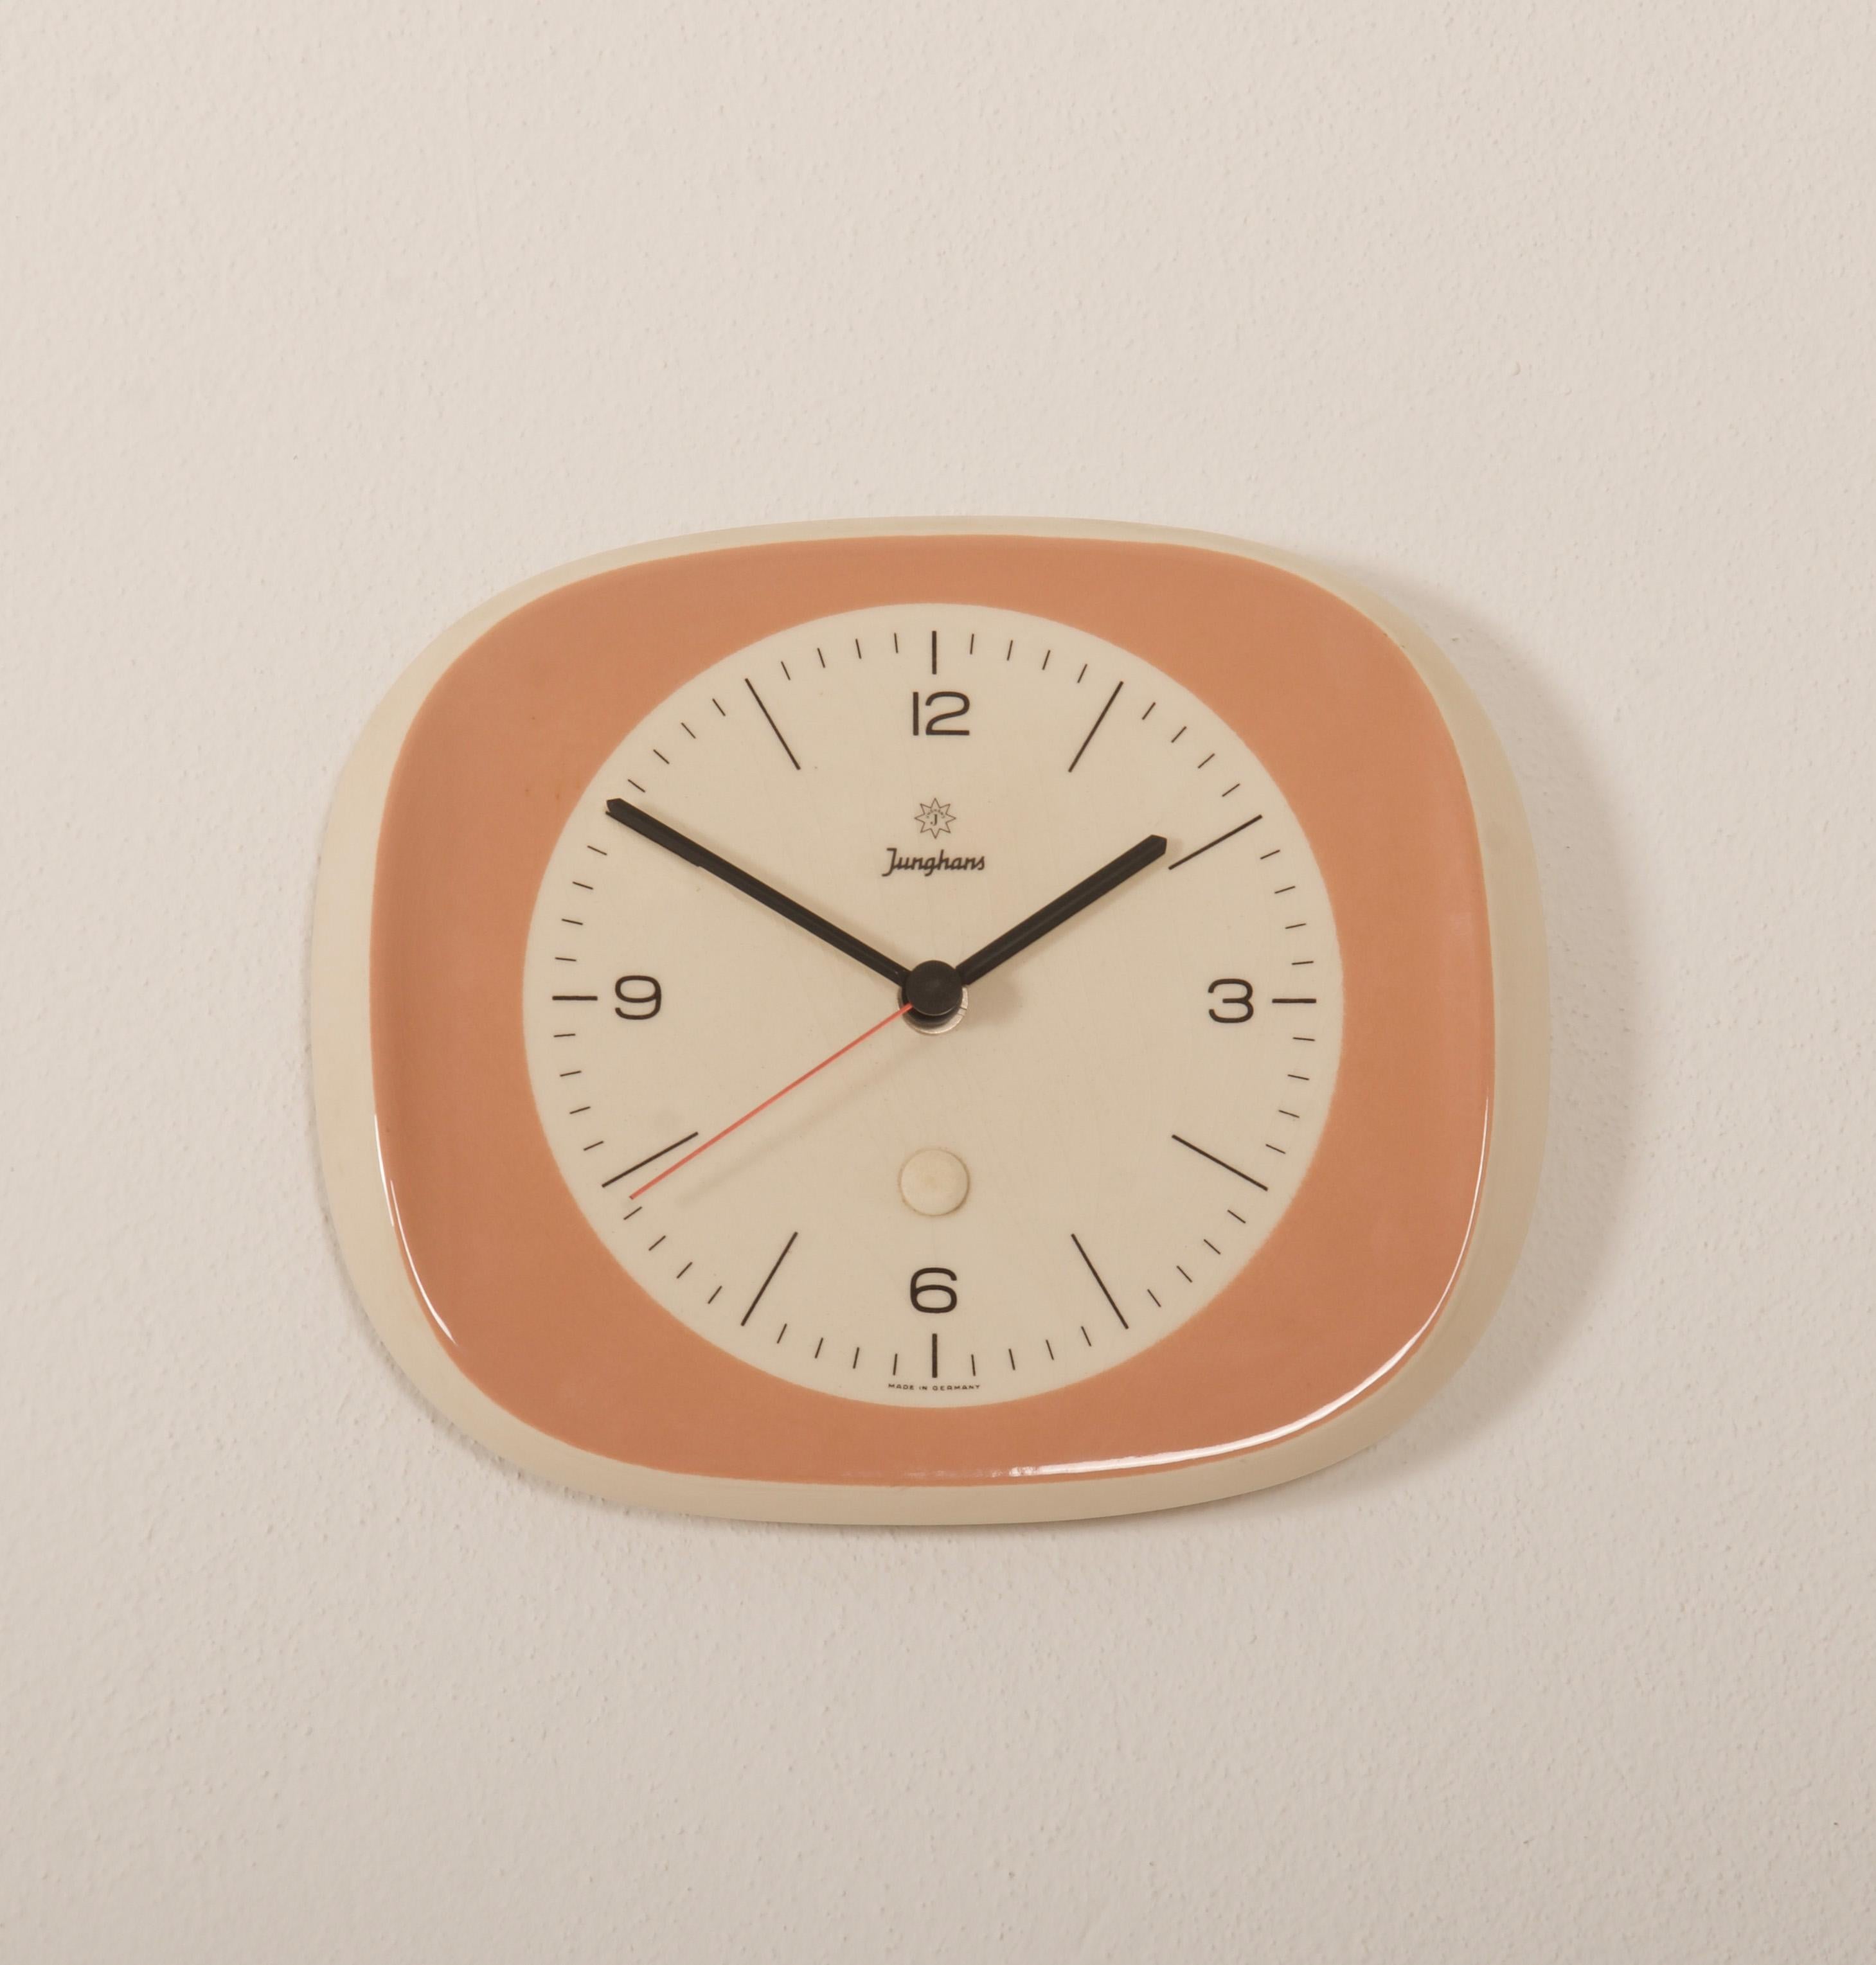 Ceramic wall clock designed in the 1950s by Max Bill for Junghans. Fitted with a battery movement.